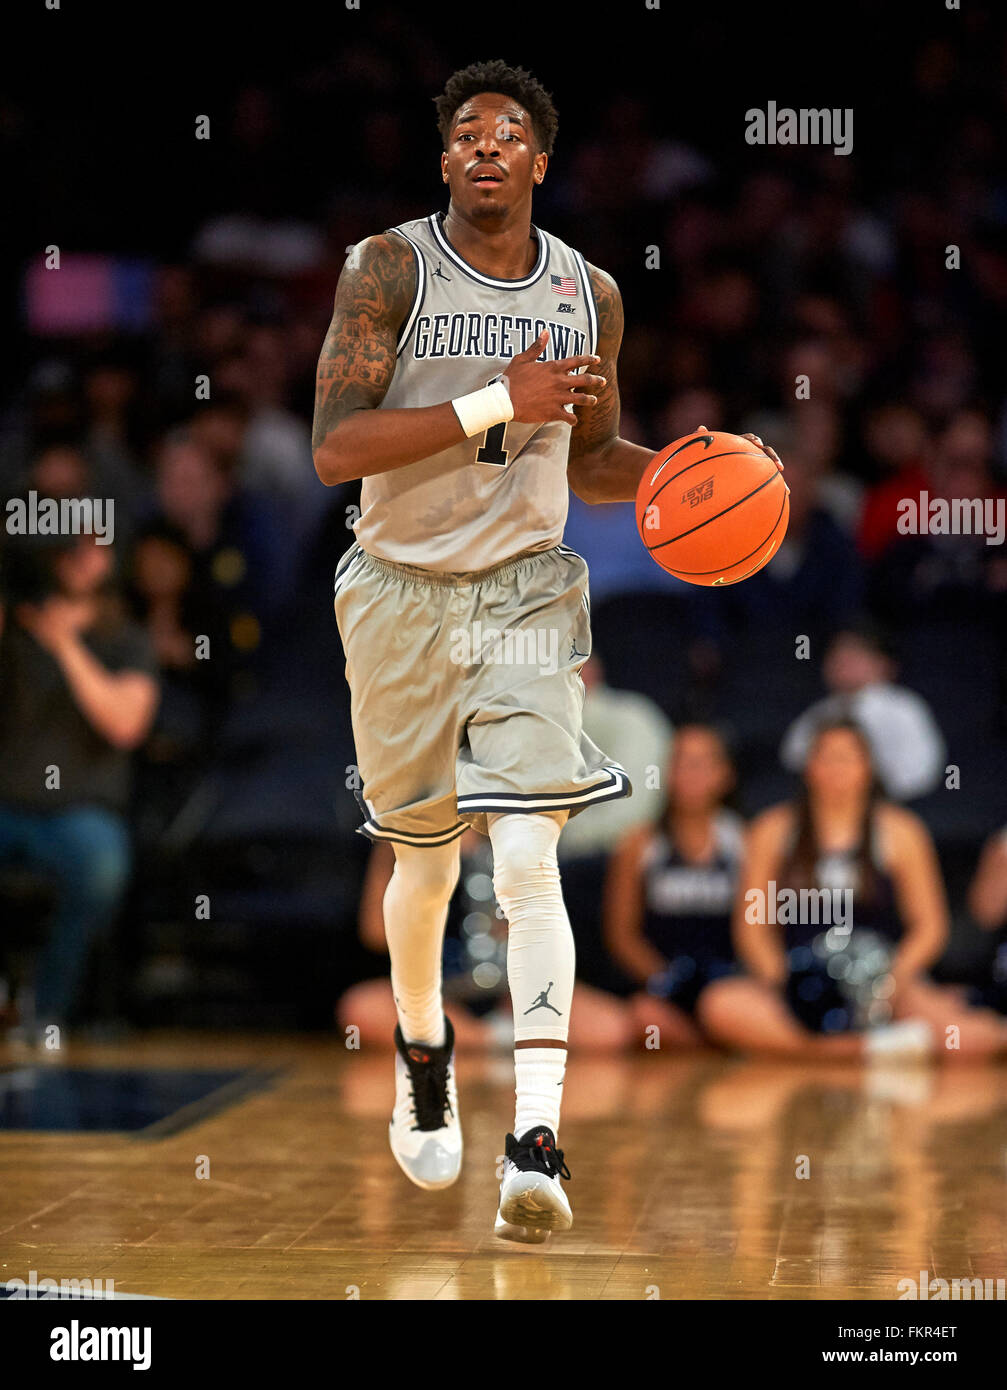 March 9, 2016 - Piscataway, New Jersey, U.S. - Georgetown's guard Tre  Campbell #1 brings the ball up court in the second half during first round  Big East Tournament between the DePaul